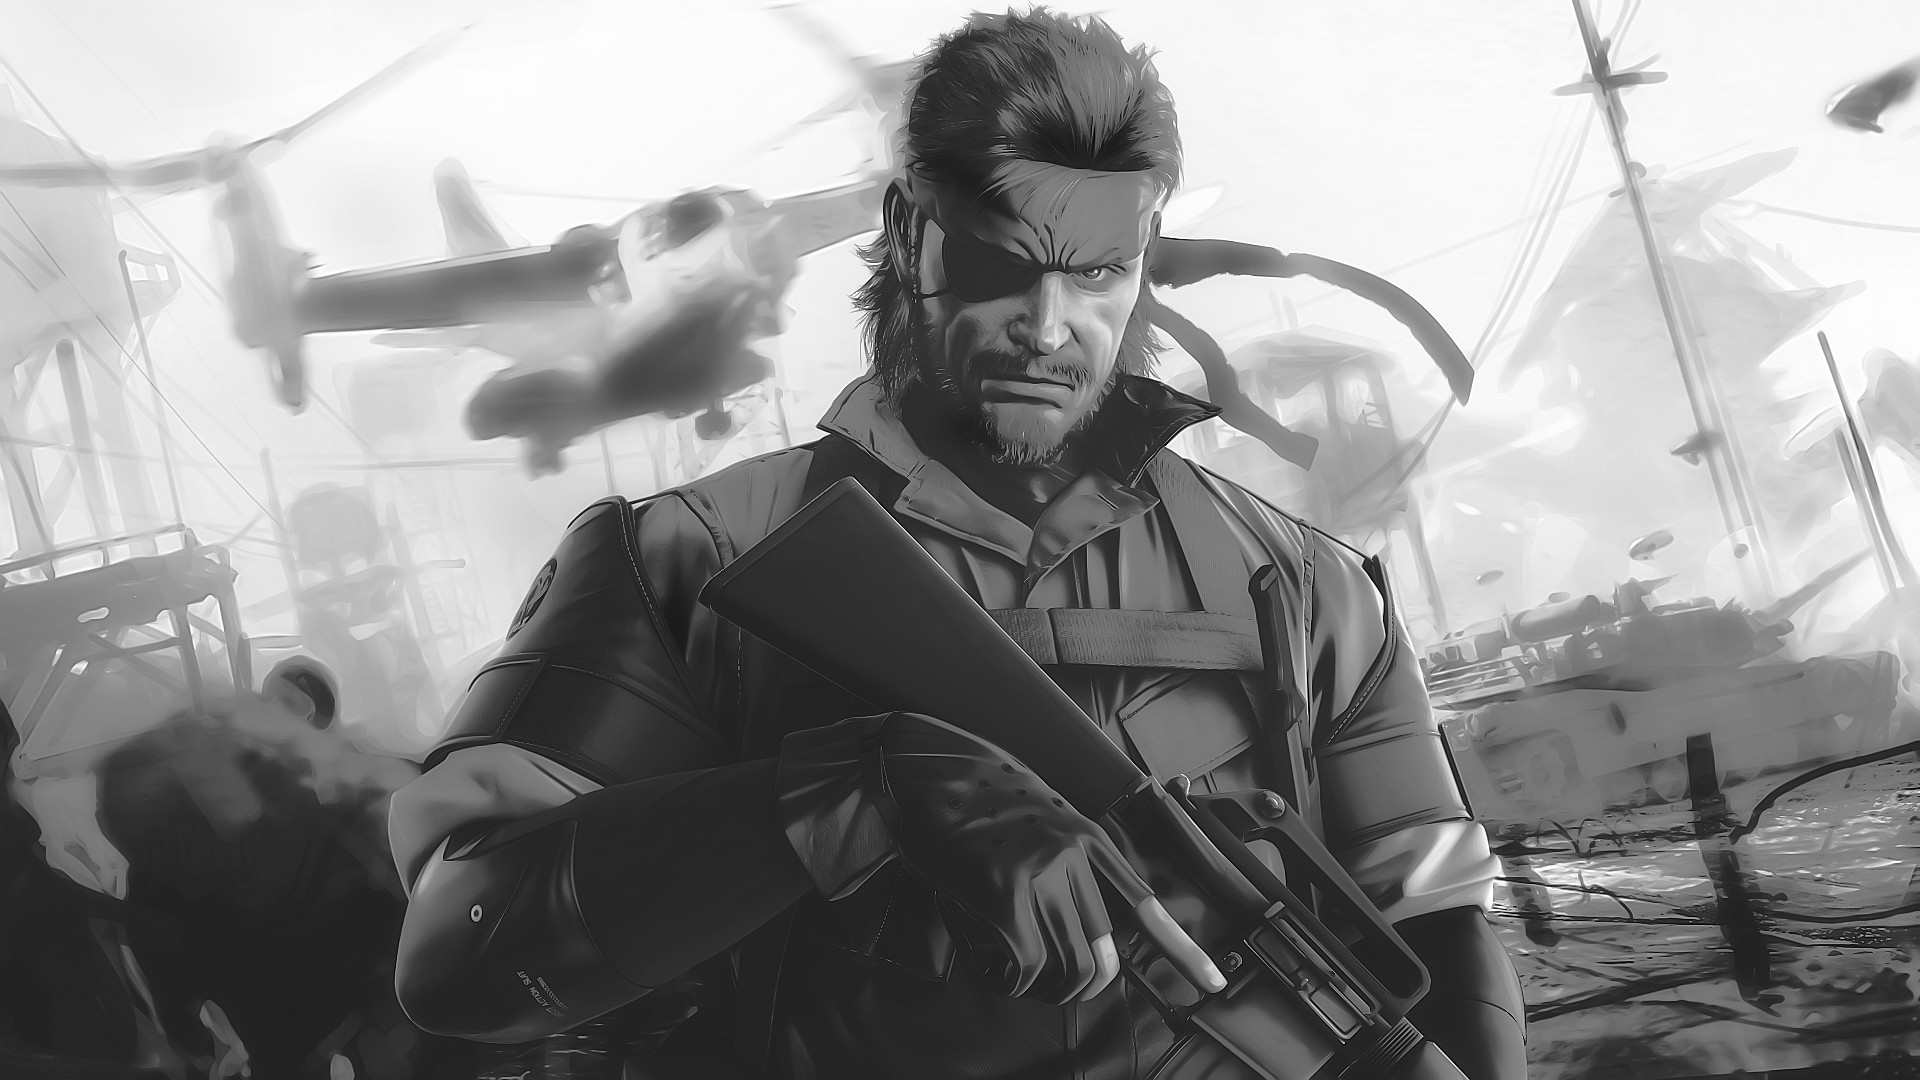 1920x1080 Search Results for “big boss metal gear wallpaper” – Adorable Wallpapers